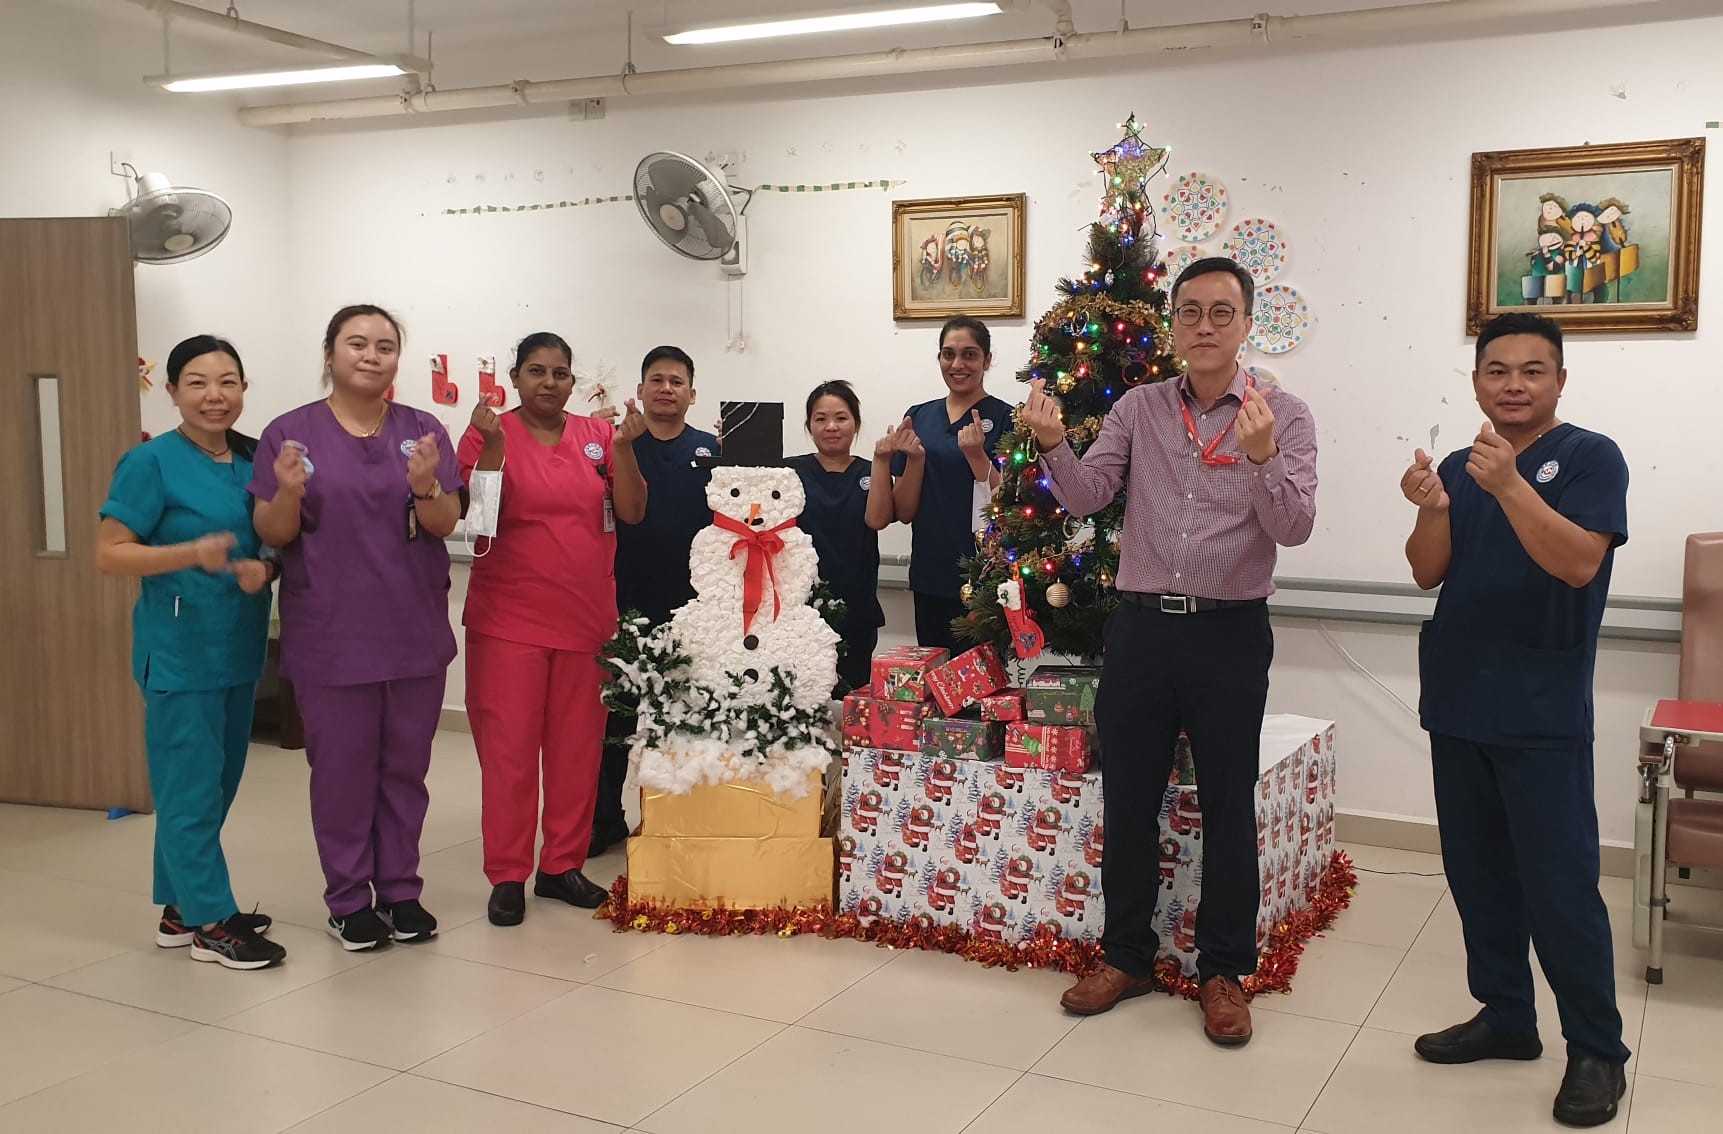 LTC (NS) Marcus Lee with colleagues at Thye Hua Kuan (THK) Nursing Home